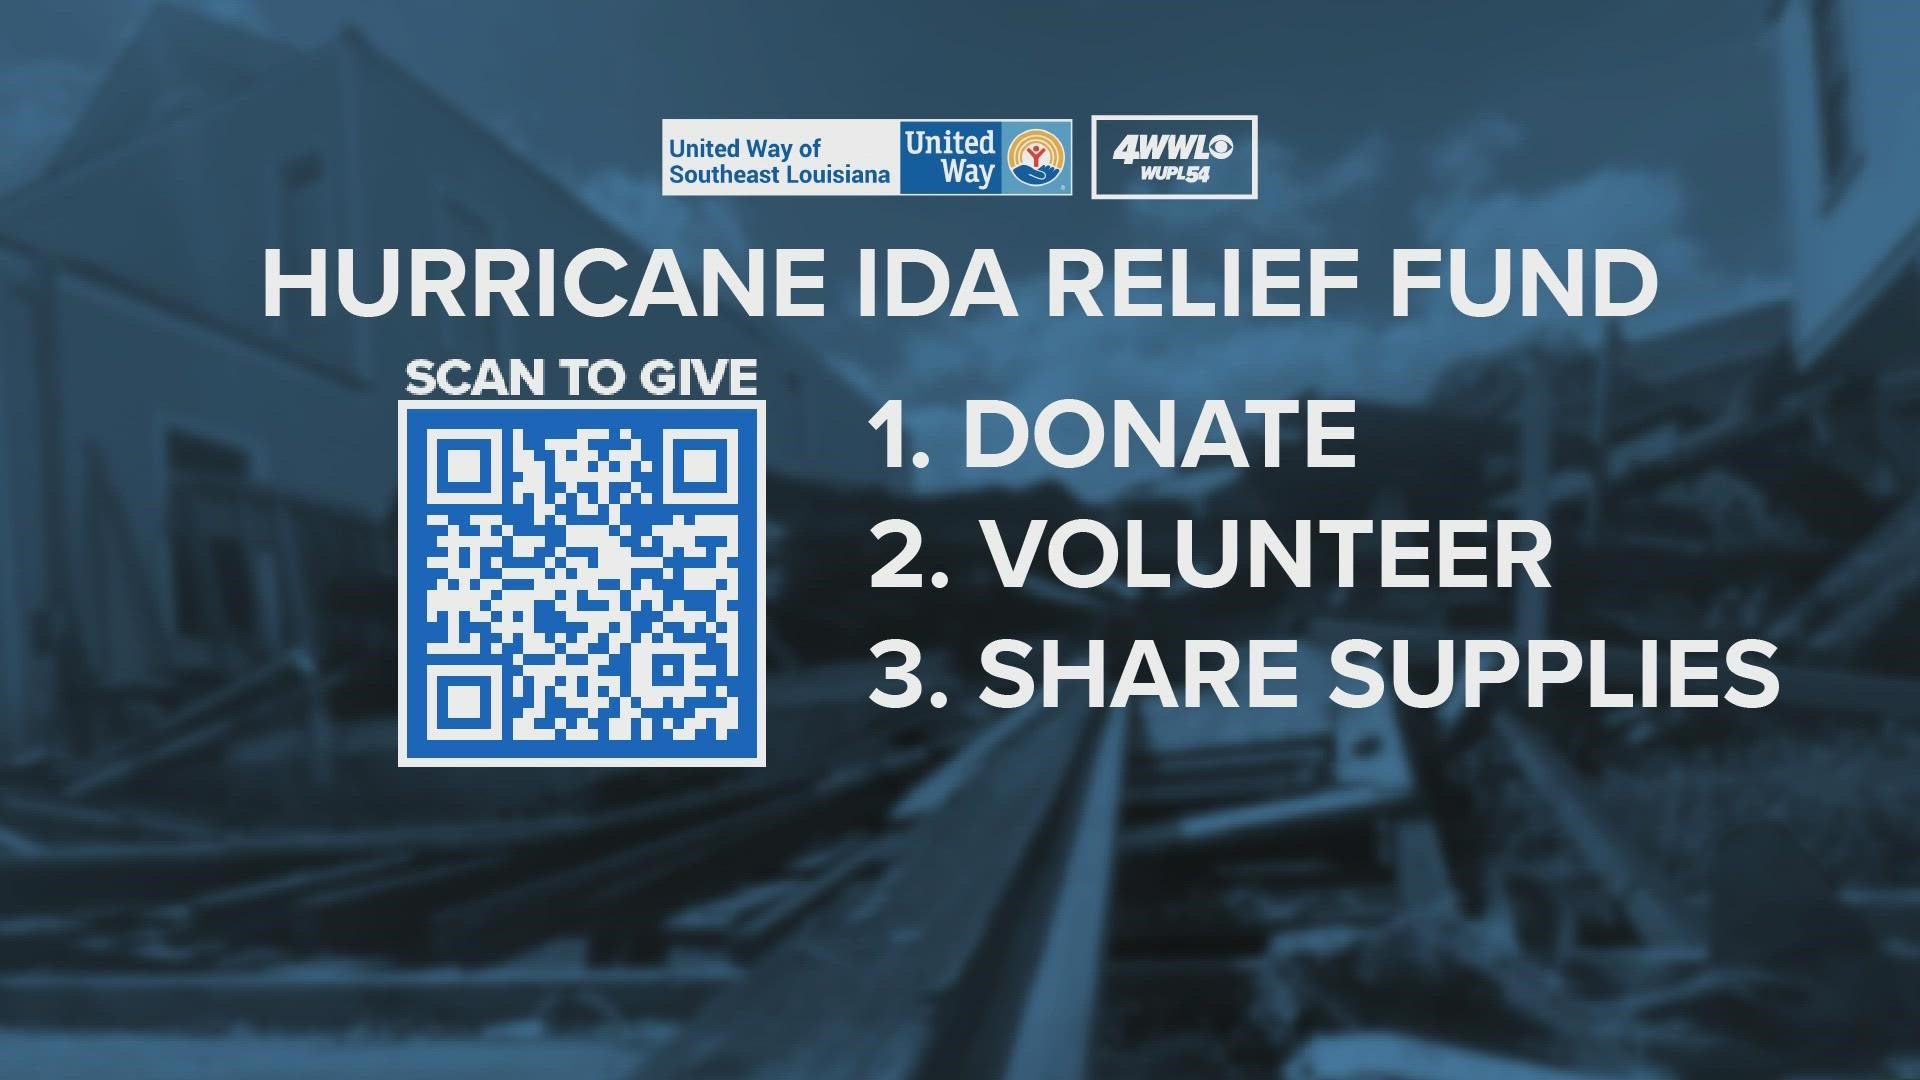 Here's how you can help out with the Hurricane Ida Relief Fund if you are able.